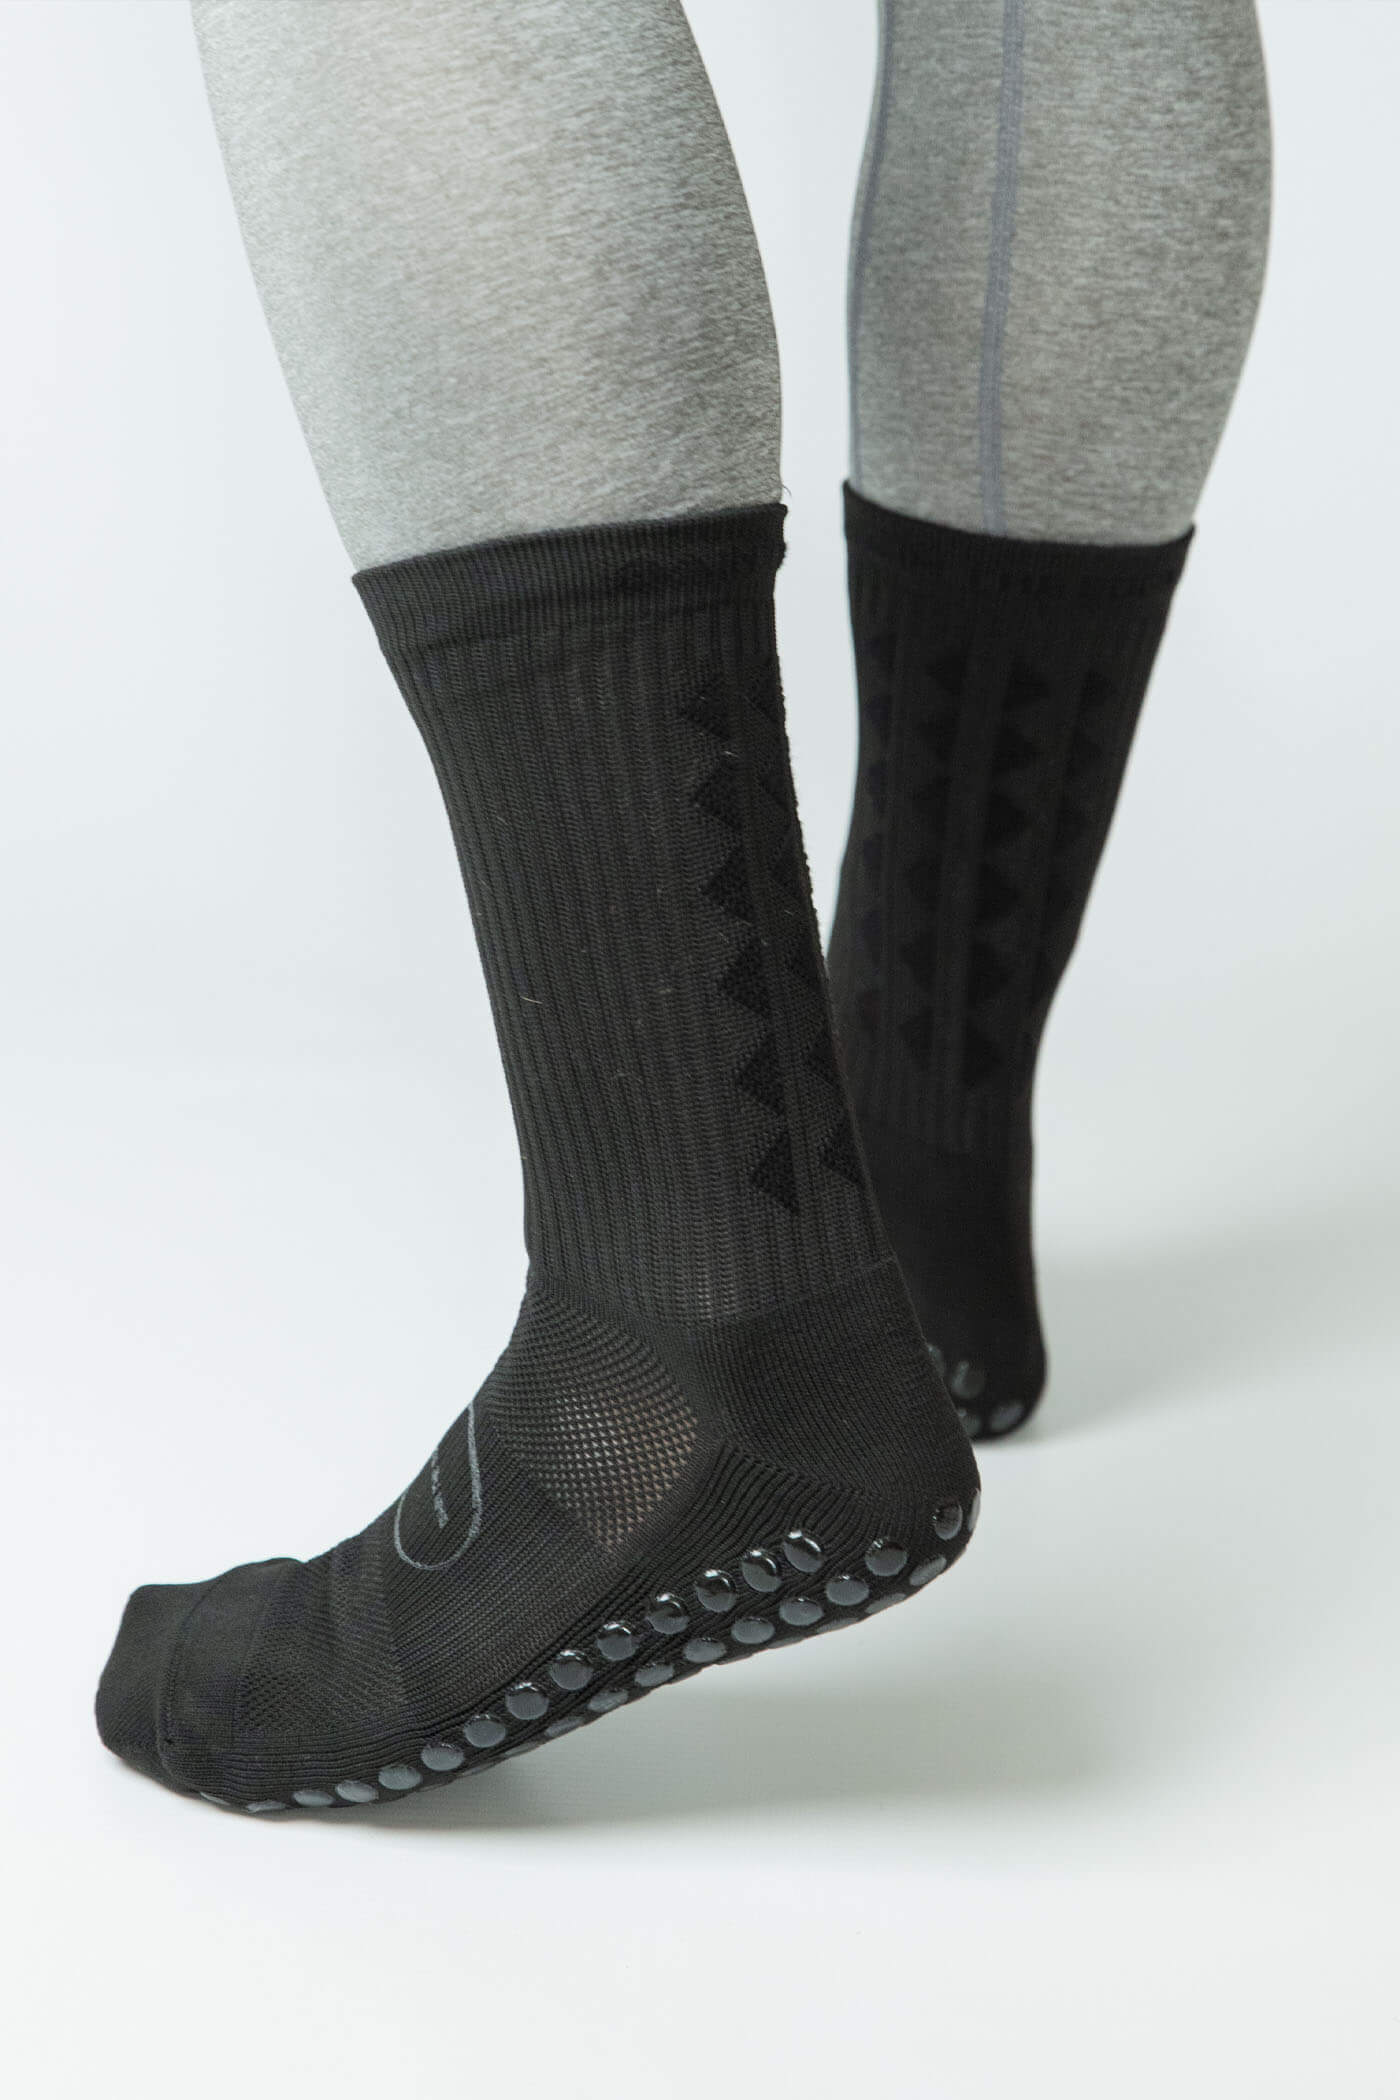 BLACKOUT LIMITED EDITION GRIP SOCKS 2.0 - Gain The Edge Official